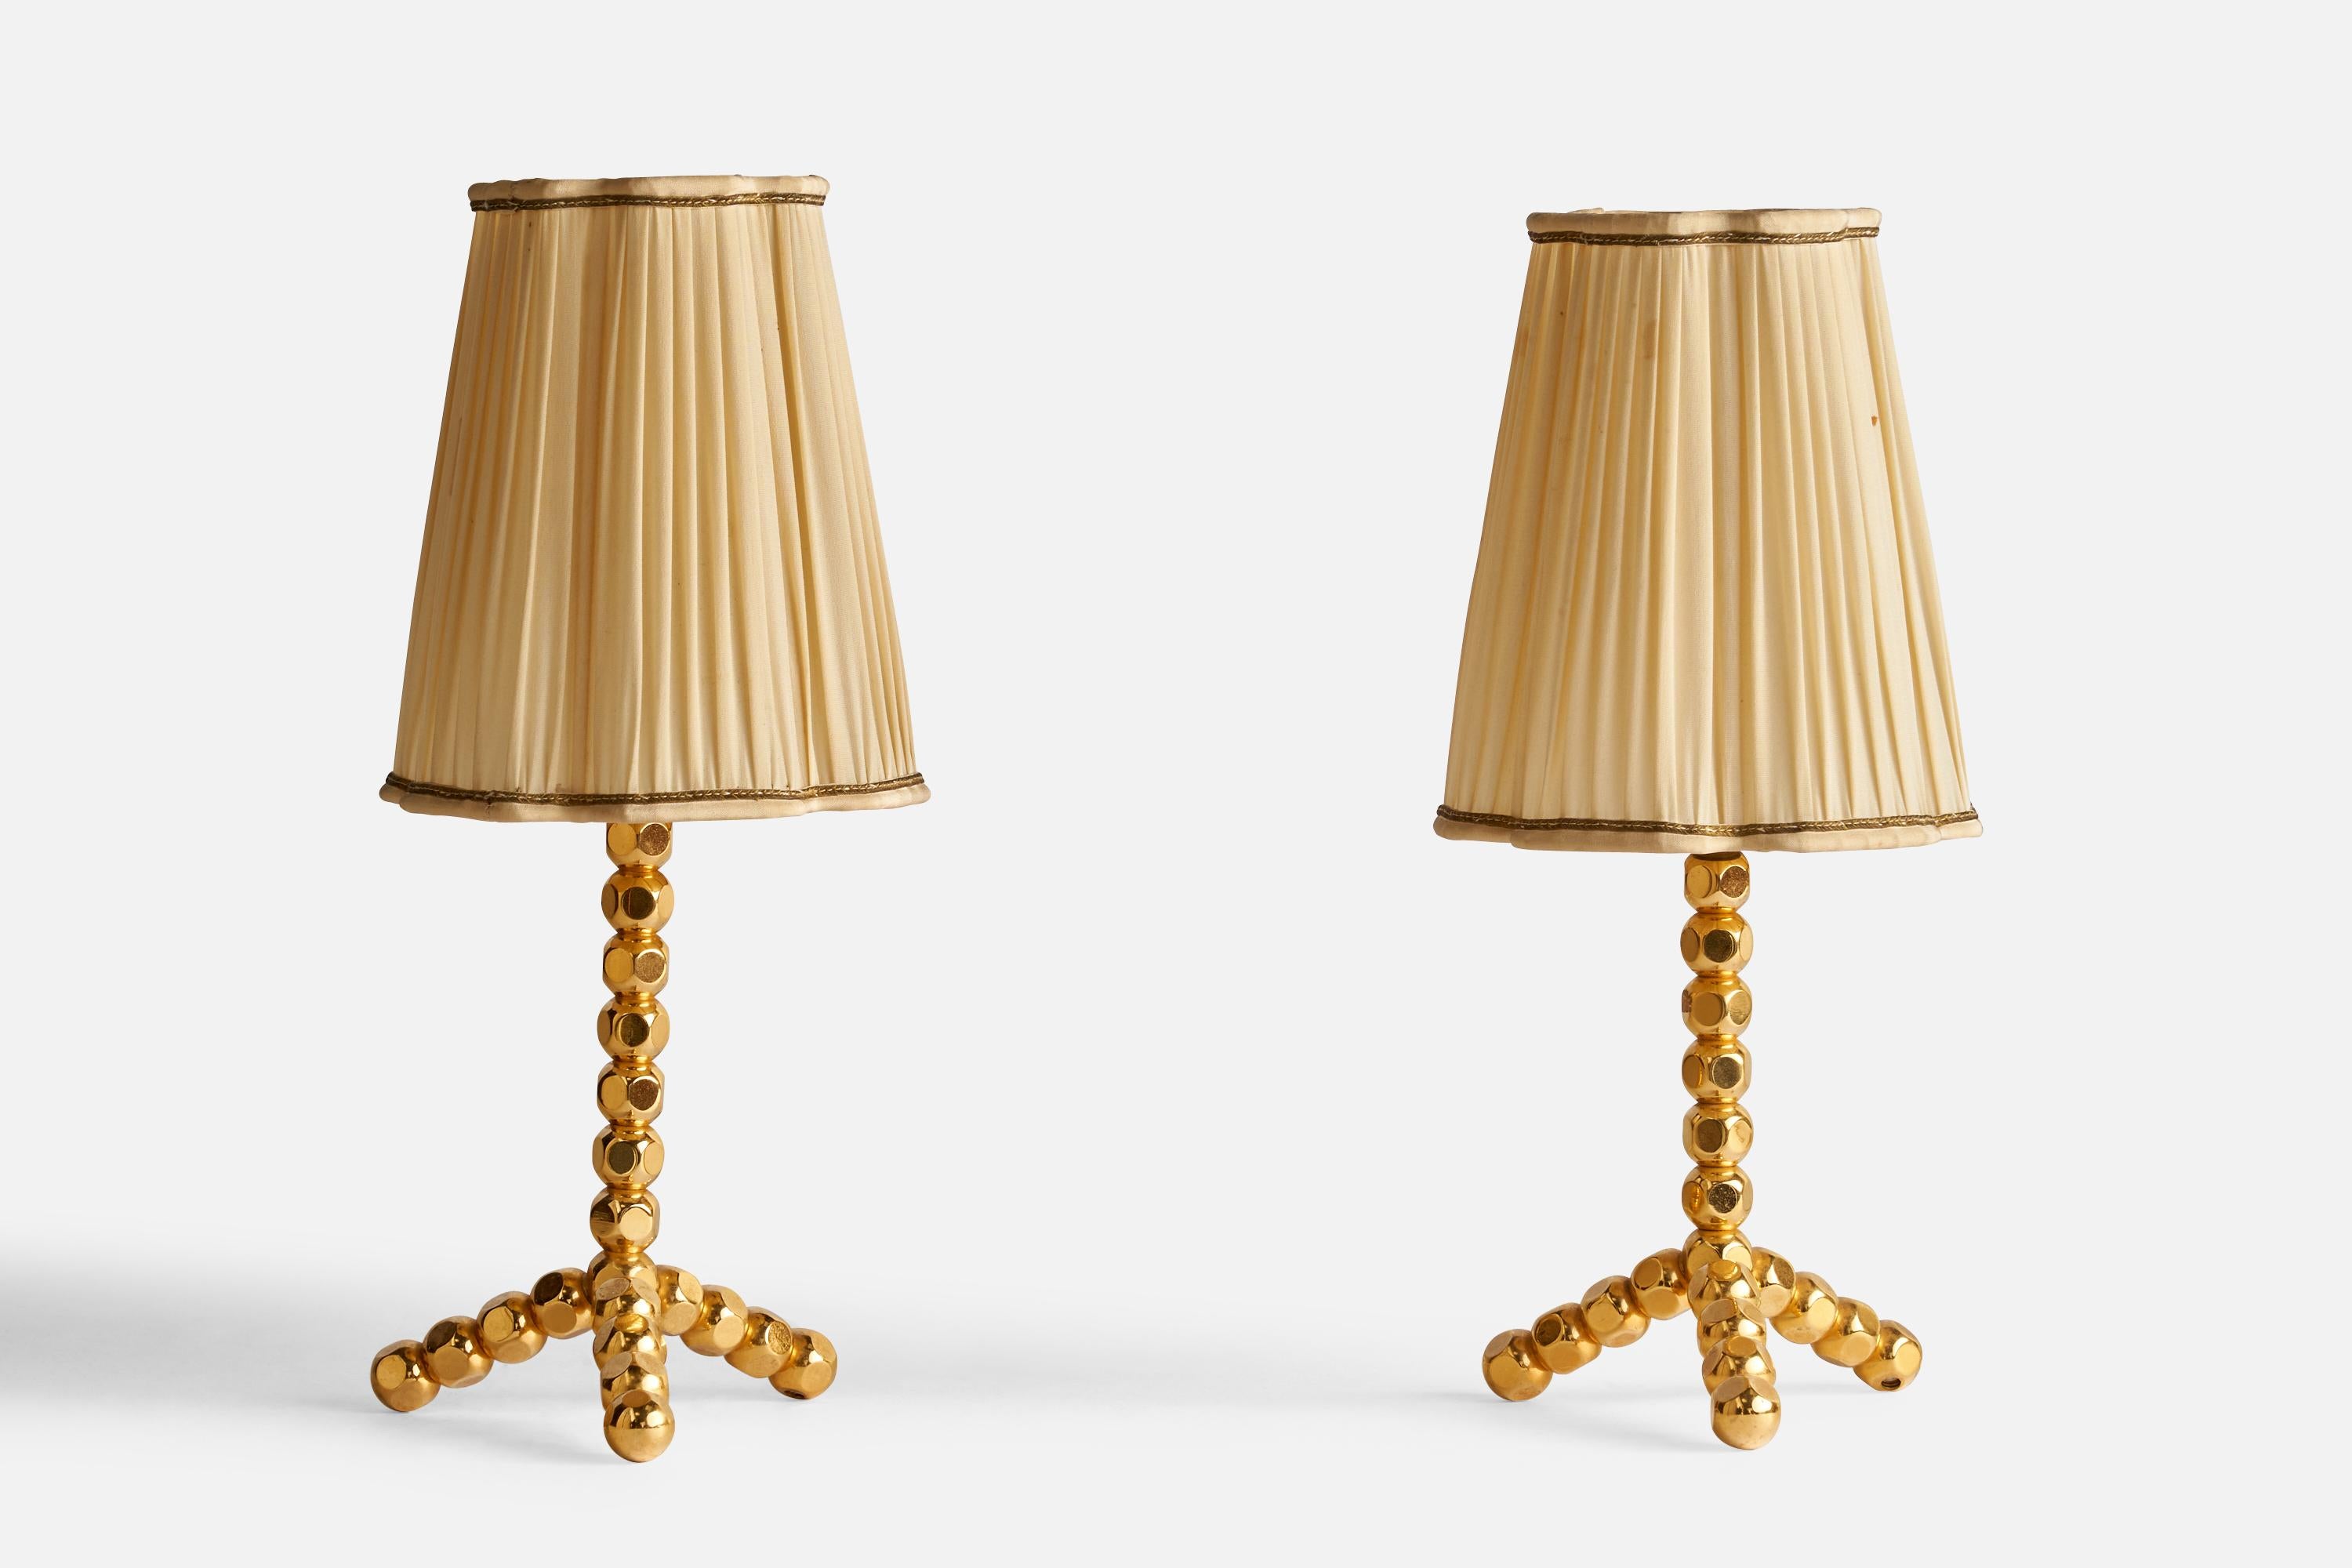 A pair of brass and beige fabric table lamps designed and produced in Sweden, 1970s.

Overall Dimensions (inches): 13.25” H x 5.6” Diameter
Bulb Specifications: E-14 Bulbs
Number of Sockets: 2
All lighting will be converted for US usage. We is